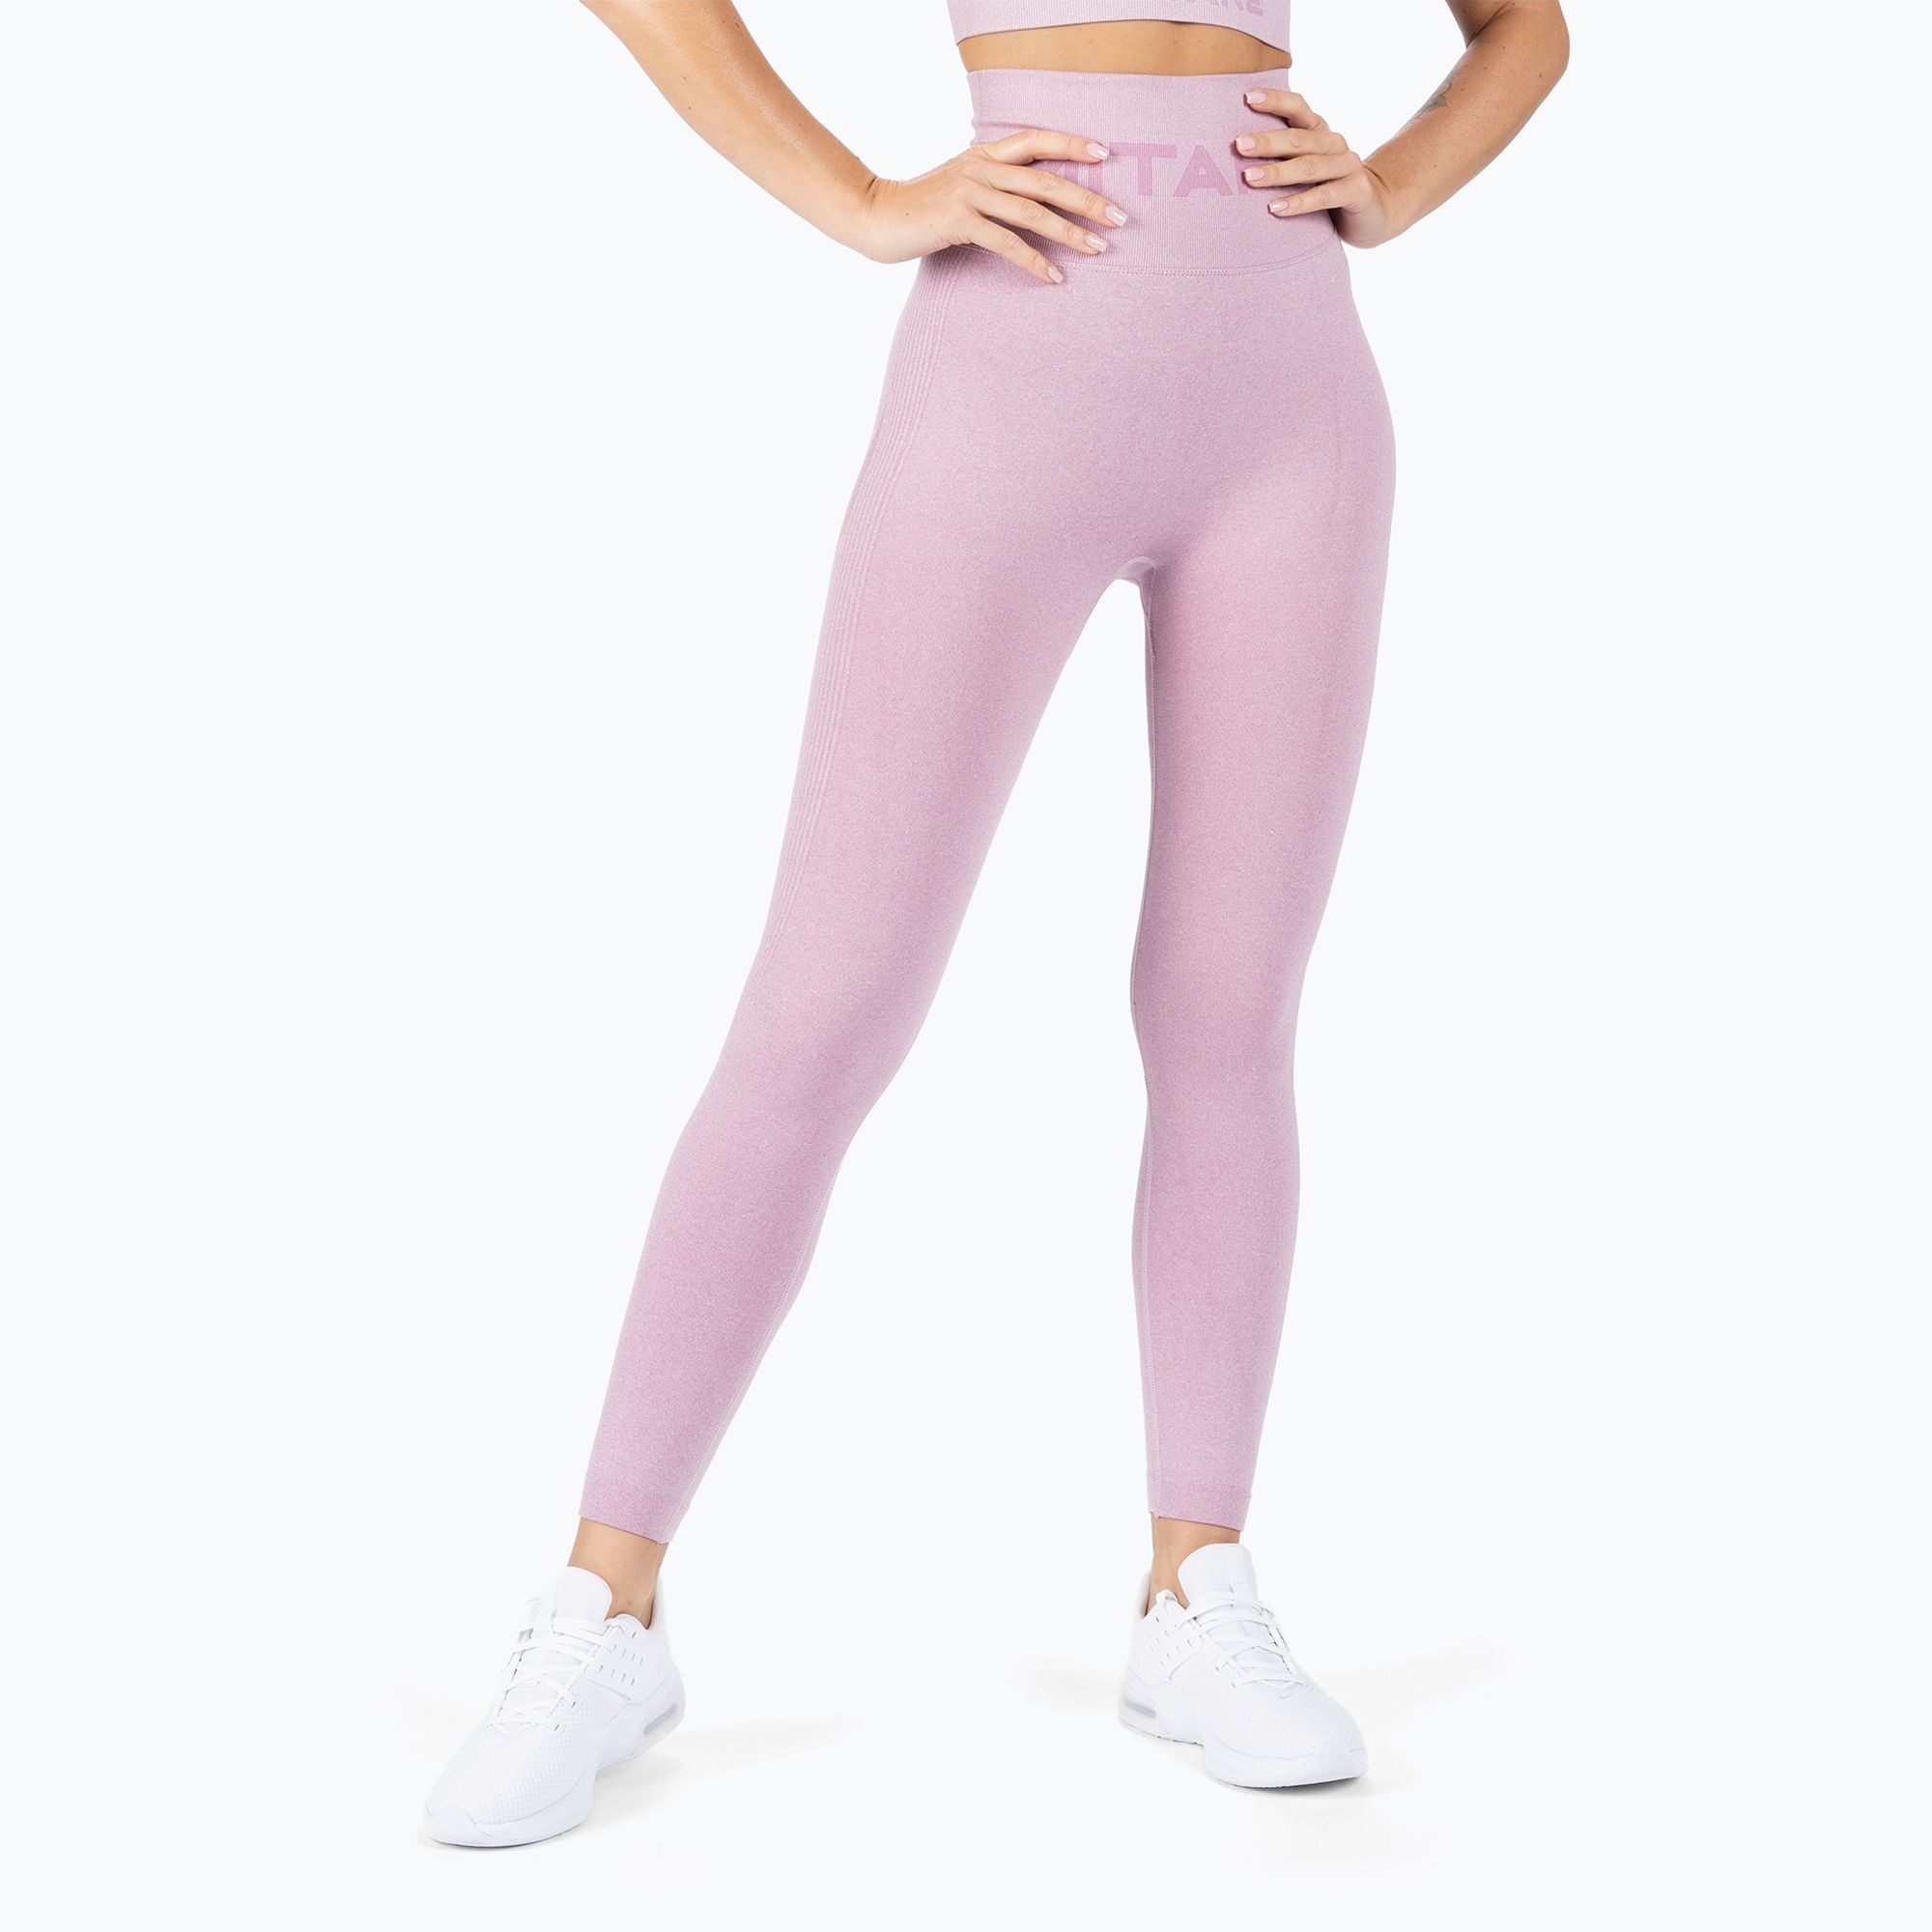 Seamless leggings PUSH UP MAX K001 pink MITARE Size S Color Pink